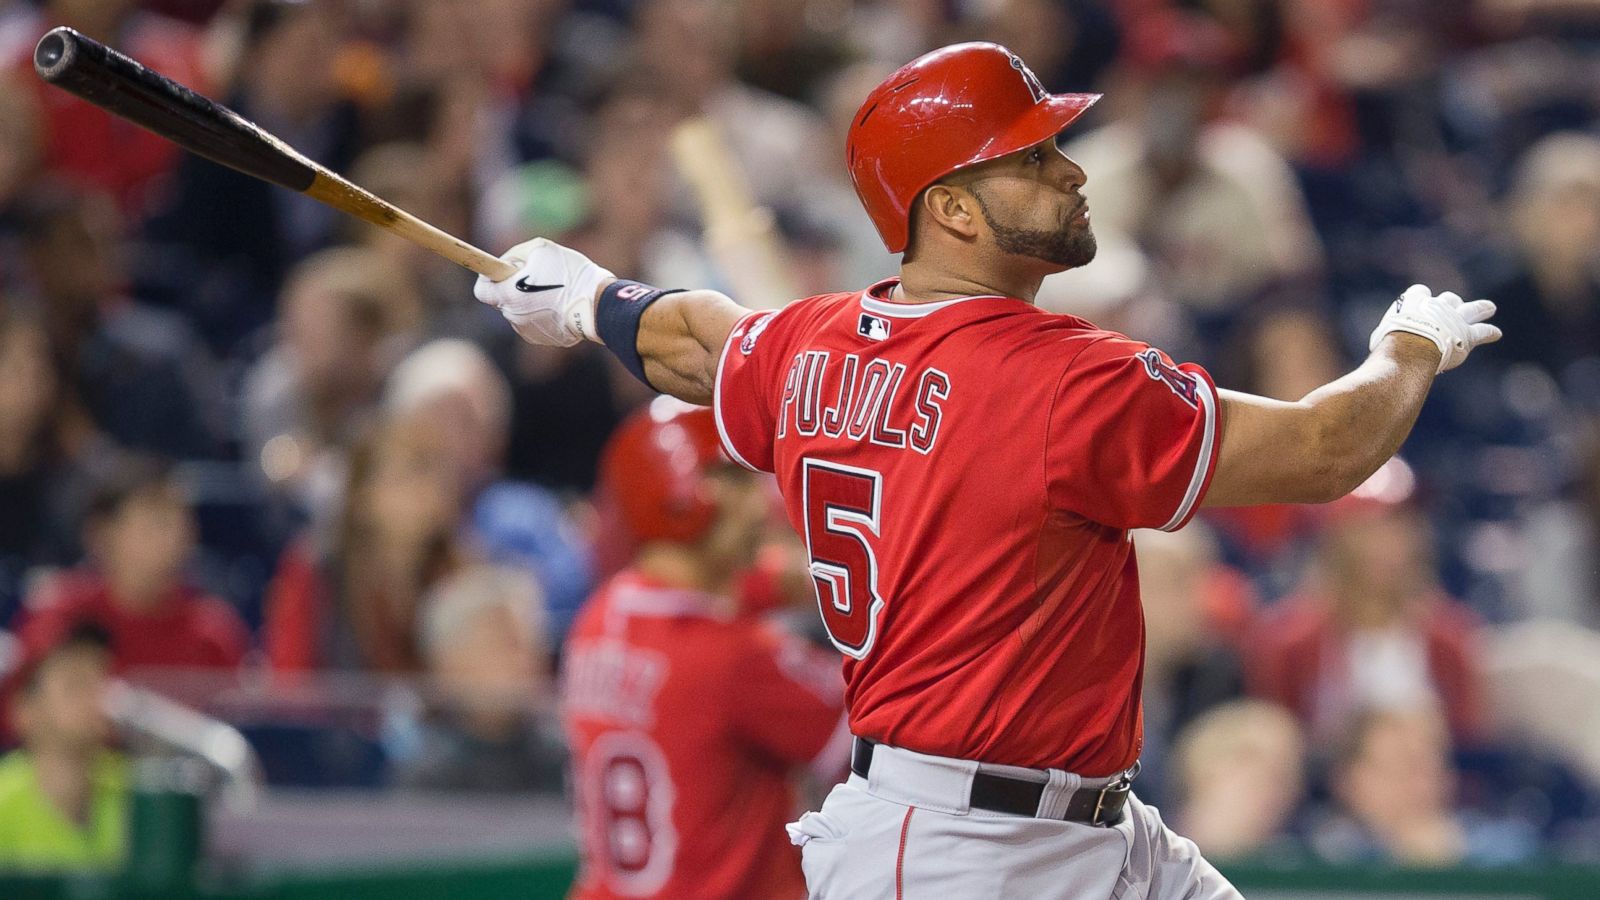 Albert Pujols hit two home runs to become the 26th member of the